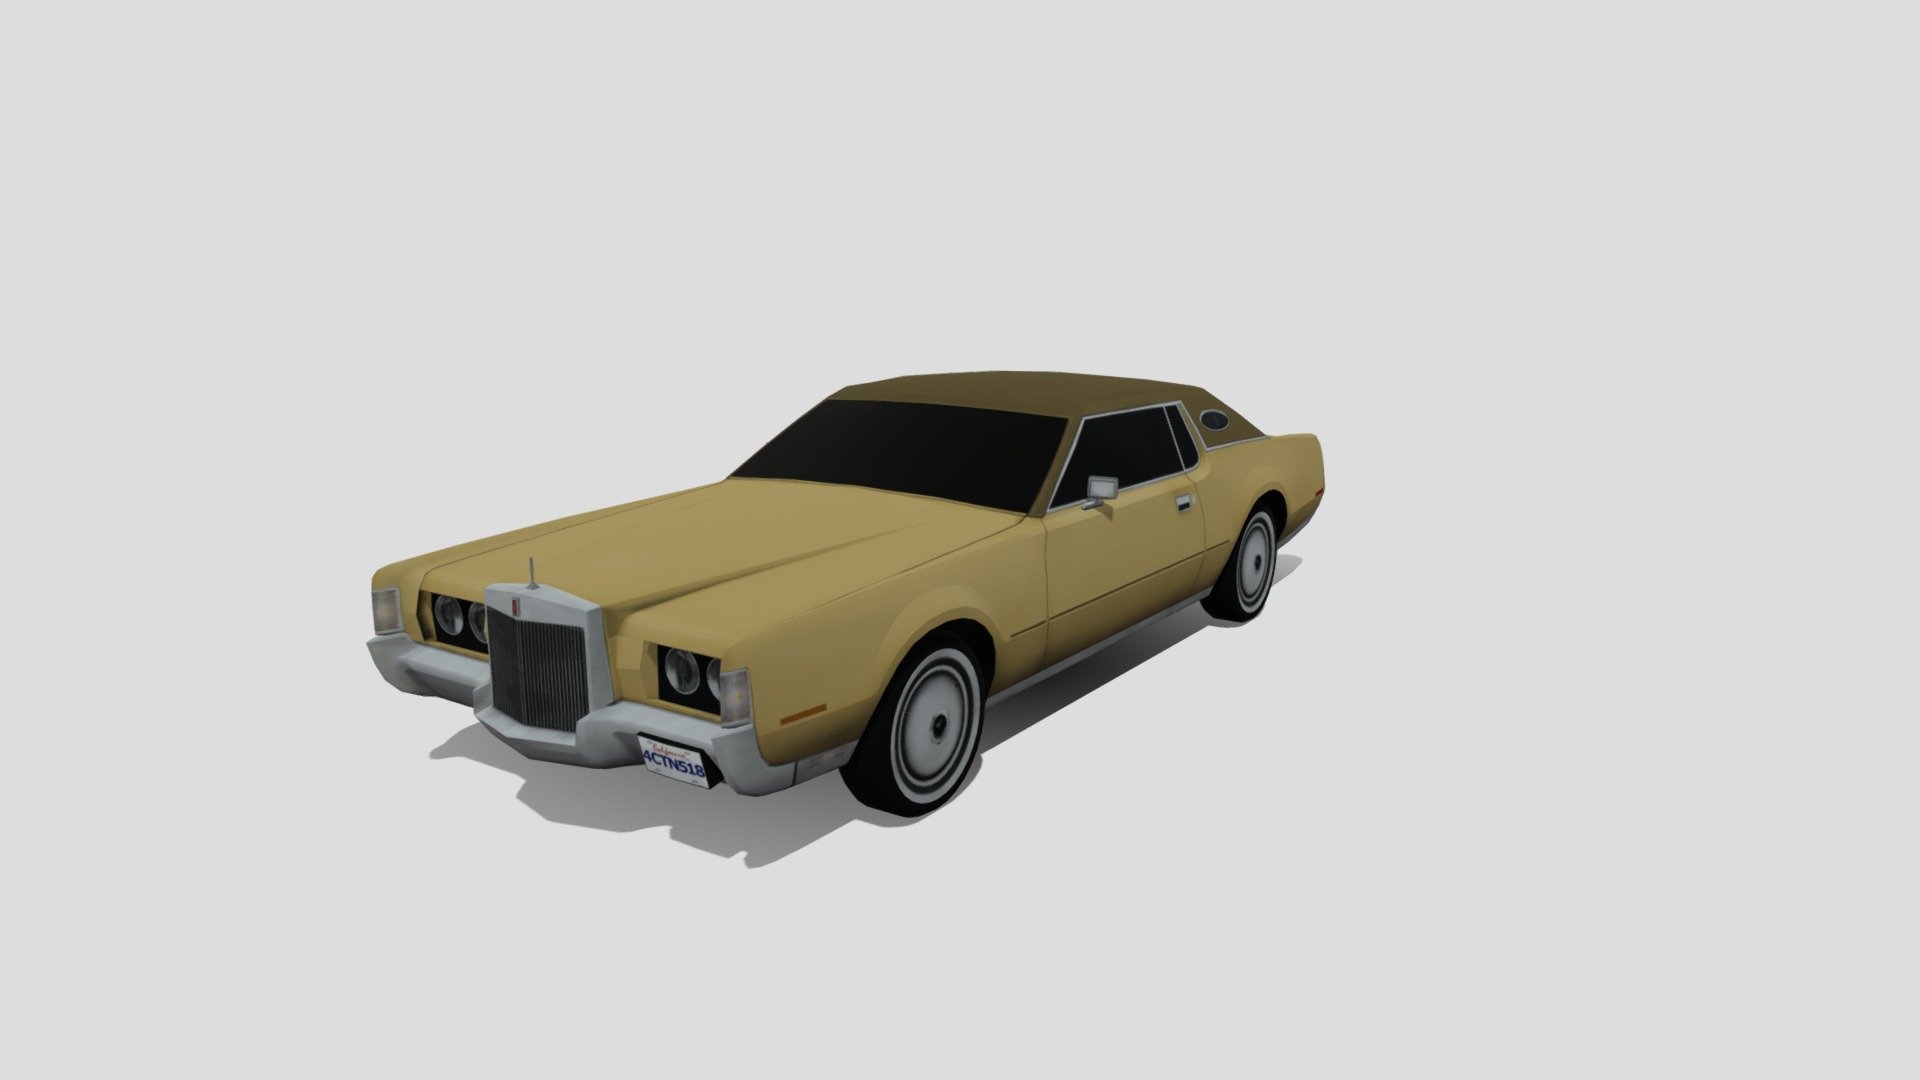 1972 Lincoln Continenal Mark IV by VeesGuy

Tris: 4577
Texture: 1024x1024 - 1972 Lincoln Continenal Mark IV - 3D model by VeesGuy 3d model